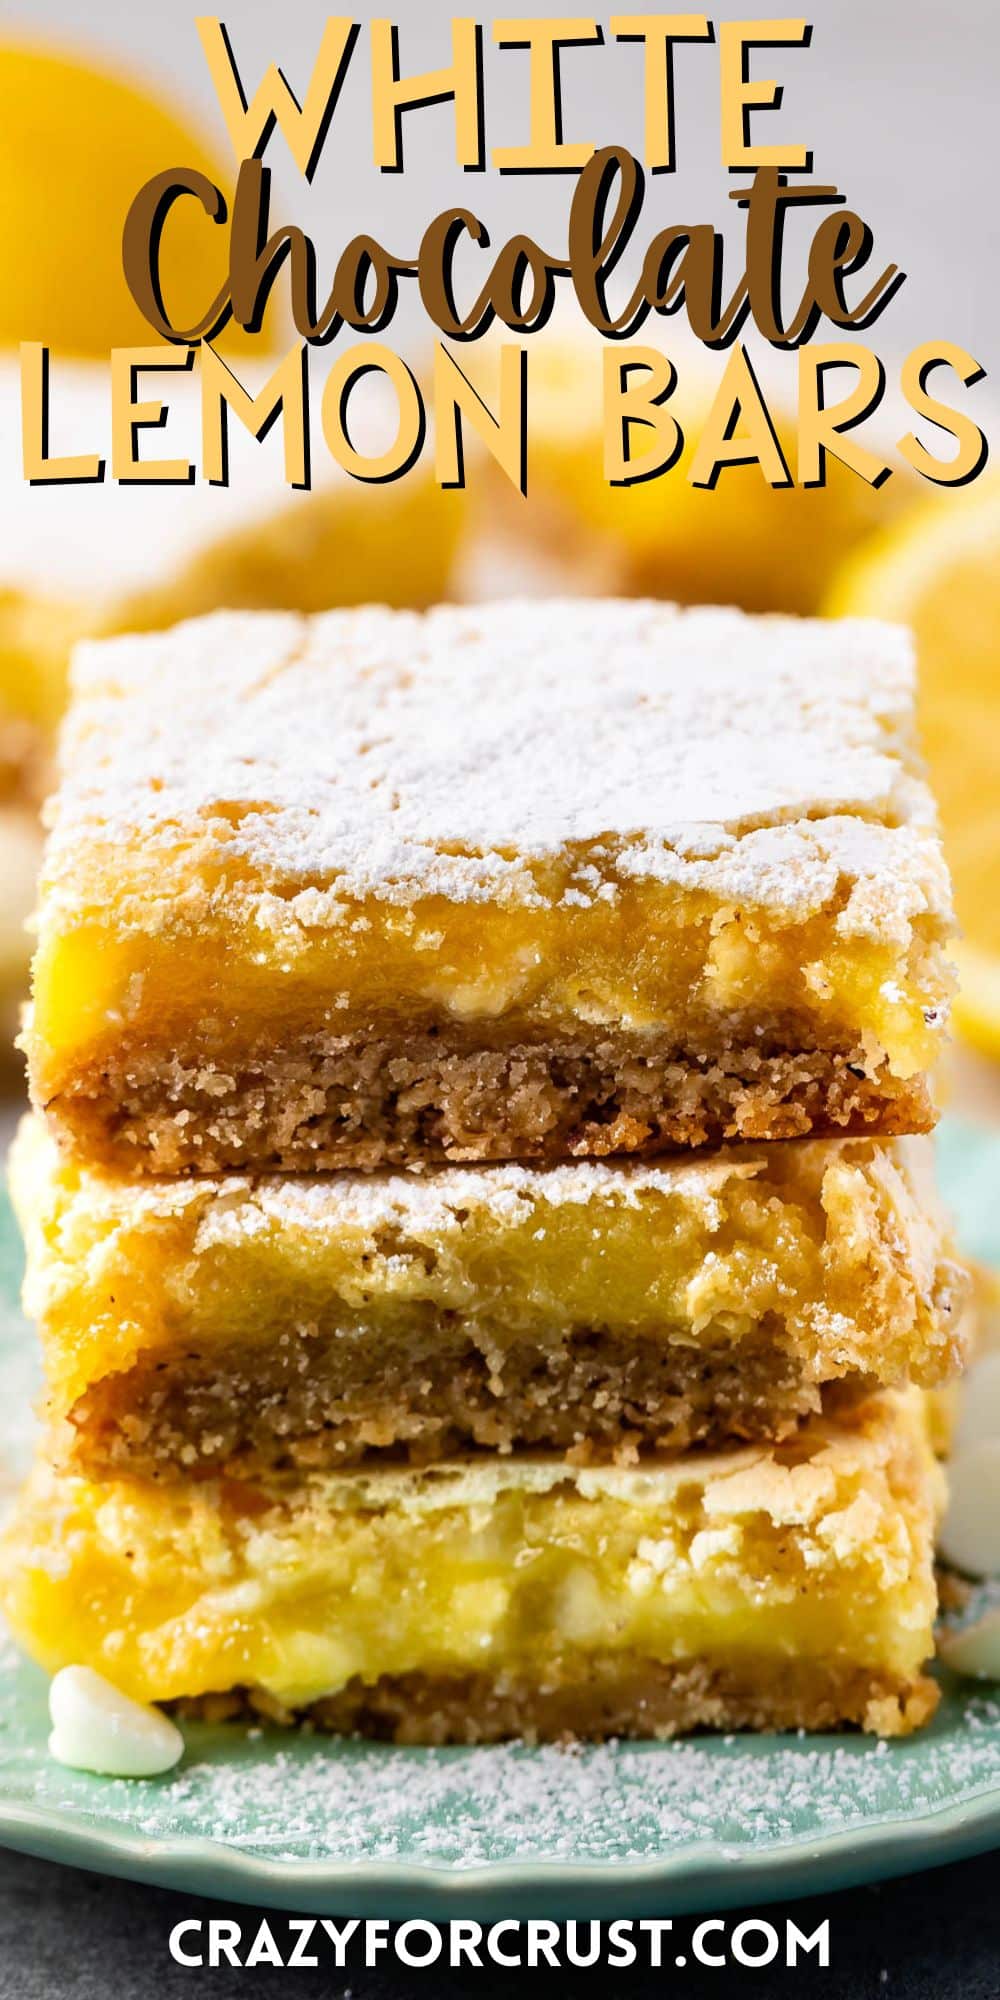 stacked lemon bars topped with powdered sugar with words on the image.